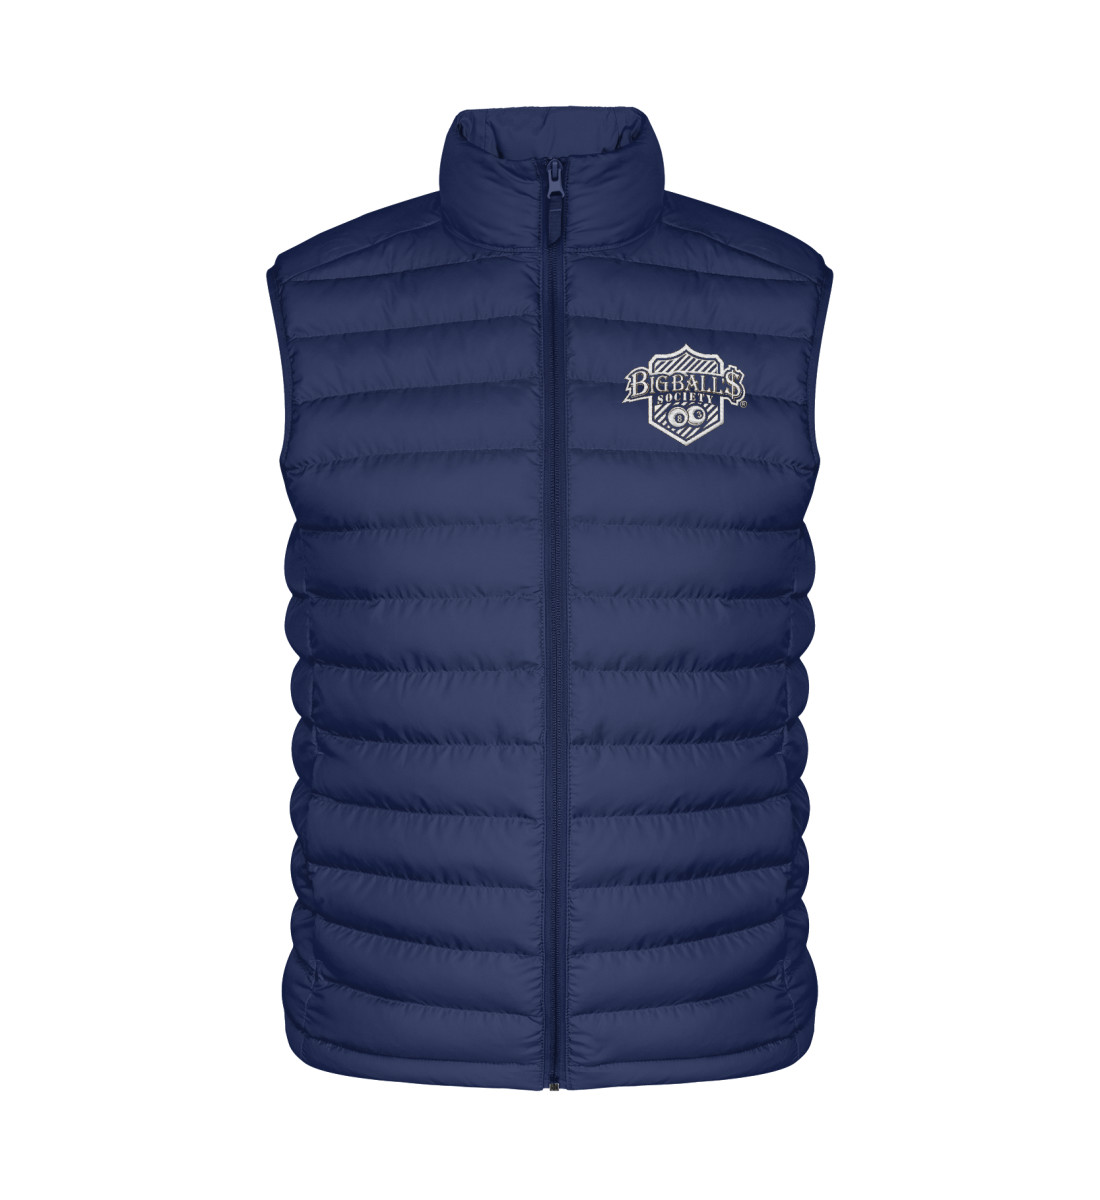 Big Ball'$ Society Premium White Gestickt  - Climber Bodywarmer ST/ST with Embroidery